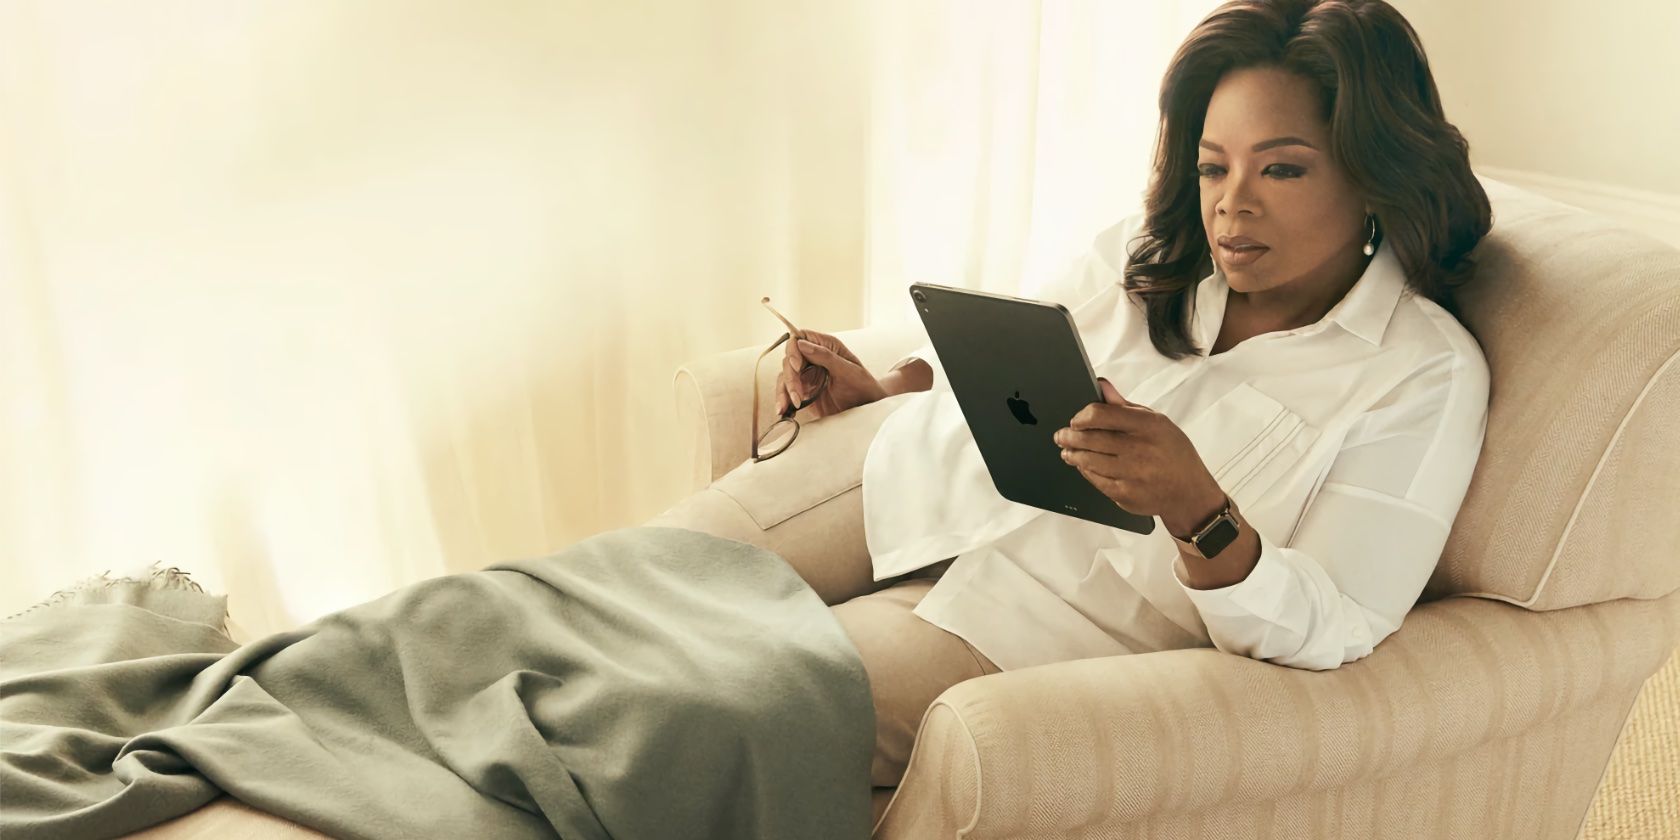 A promotional photograph showing Oprah laying on her crouch and reading a book on her iPad